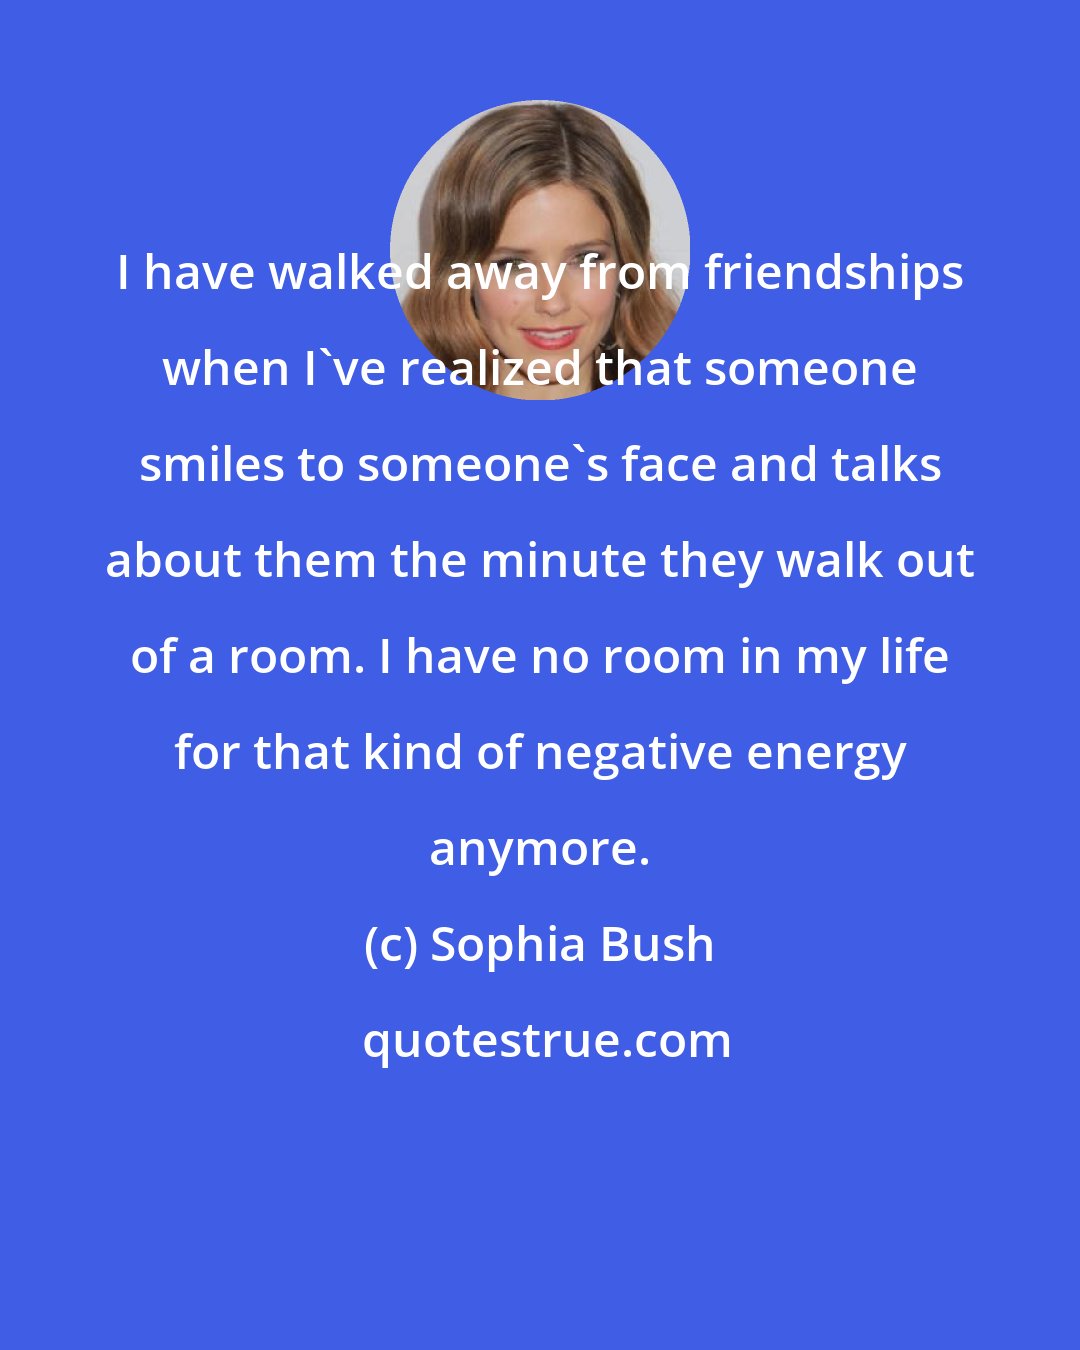 Sophia Bush: I have walked away from friendships when I've realized that someone smiles to someone's face and talks about them the minute they walk out of a room. I have no room in my life for that kind of negative energy anymore.